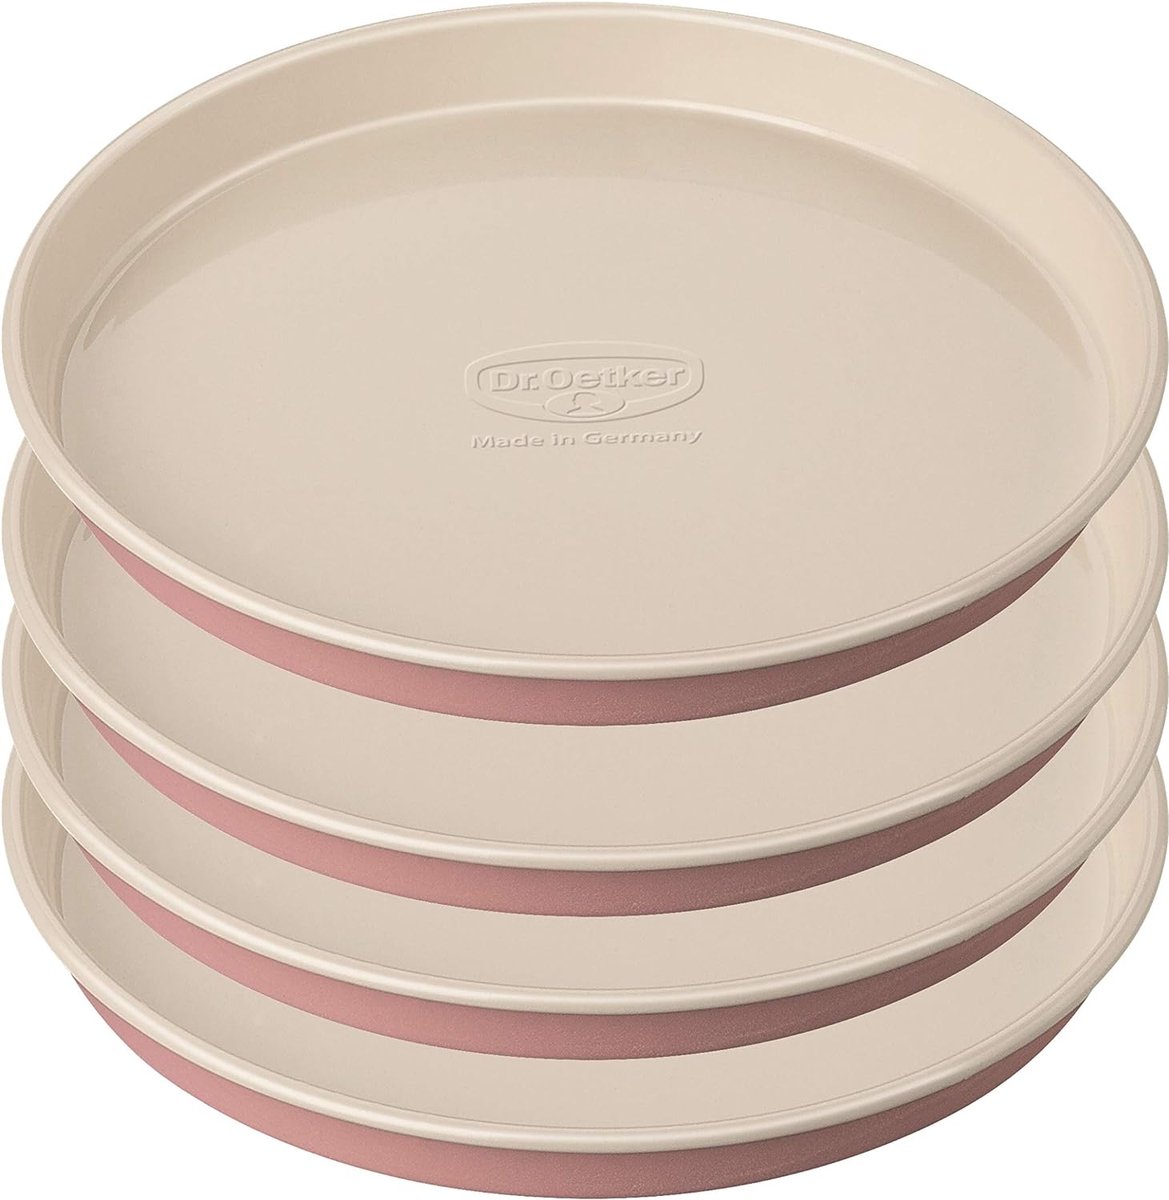 4-piece baking mould set with 4 round baking trays Ø 17 with non-stick coating for baking high cakes such as layer cakes and rainbow cakes in a fun retro design (pink/cream)